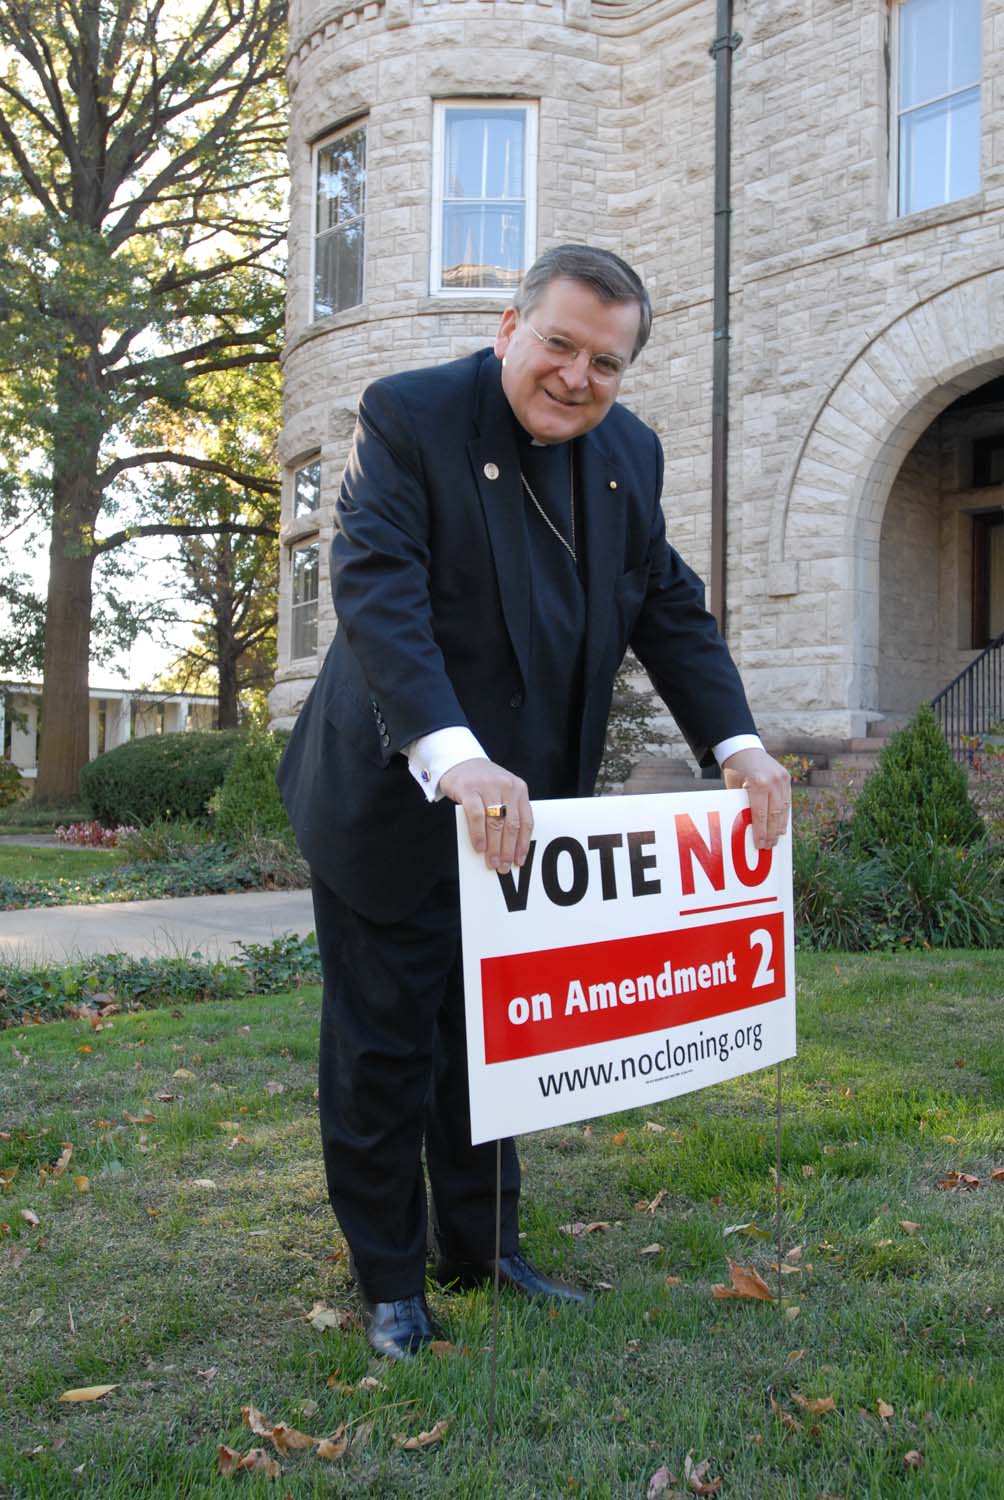 Historical - Photograph - Archbishop Burke with sign in yard of residence regarding Amendment 2, stem cell initiative